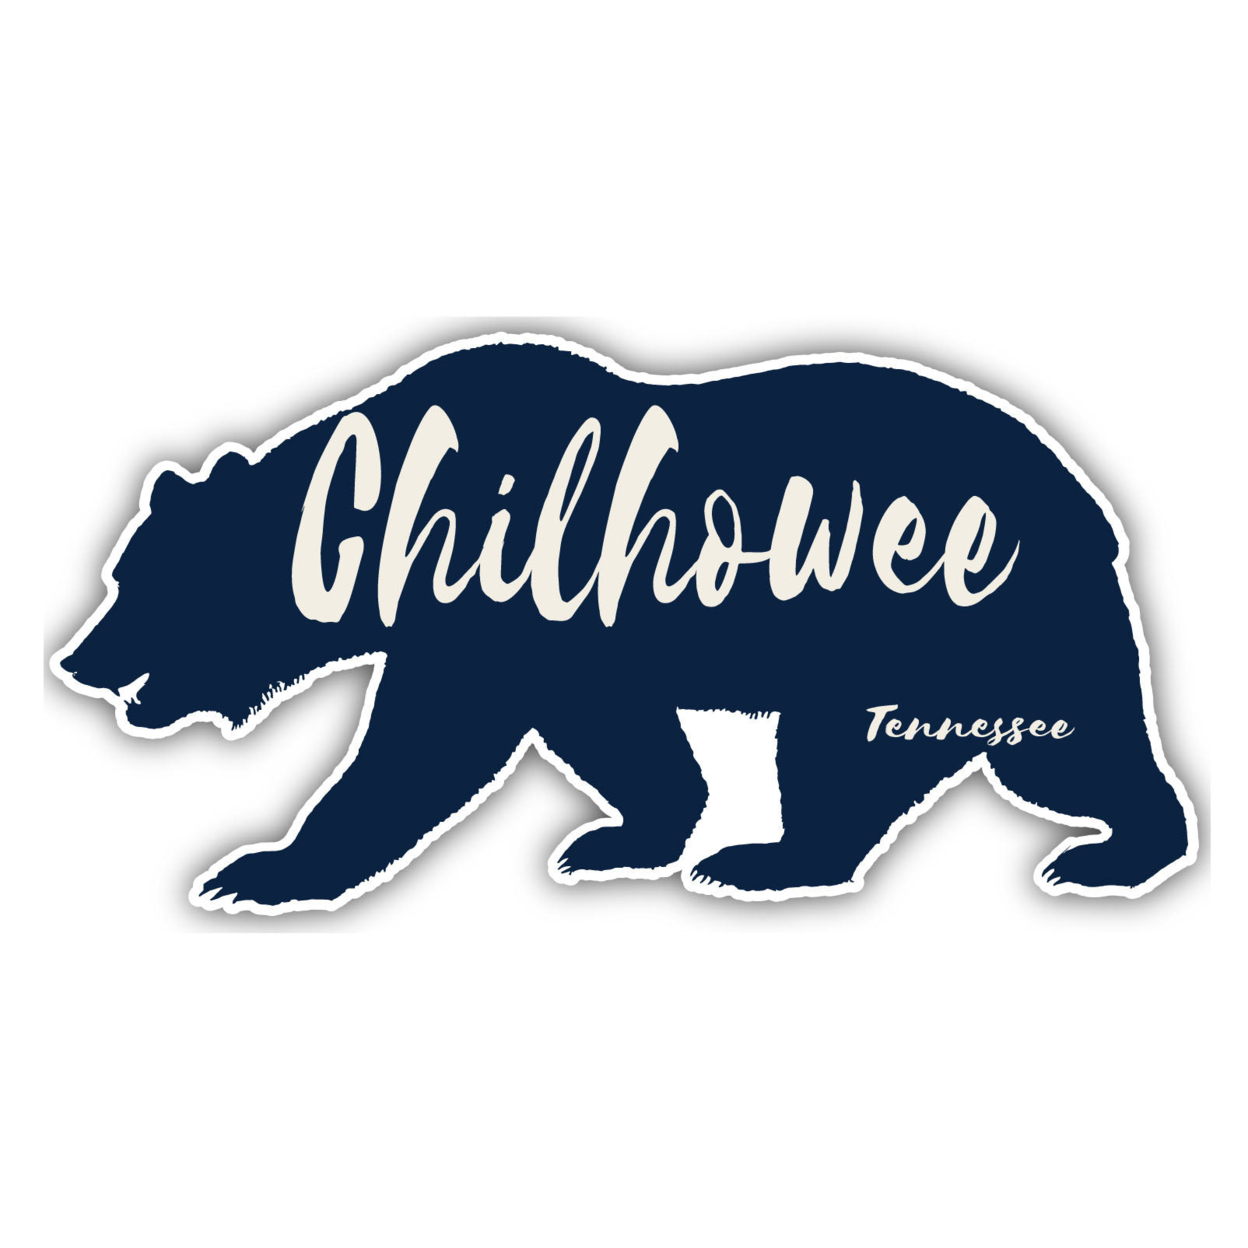 Chilhowee Tennessee Souvenir Decorative Stickers (Choose Theme And Size) - Single Unit, 4-Inch, Bear